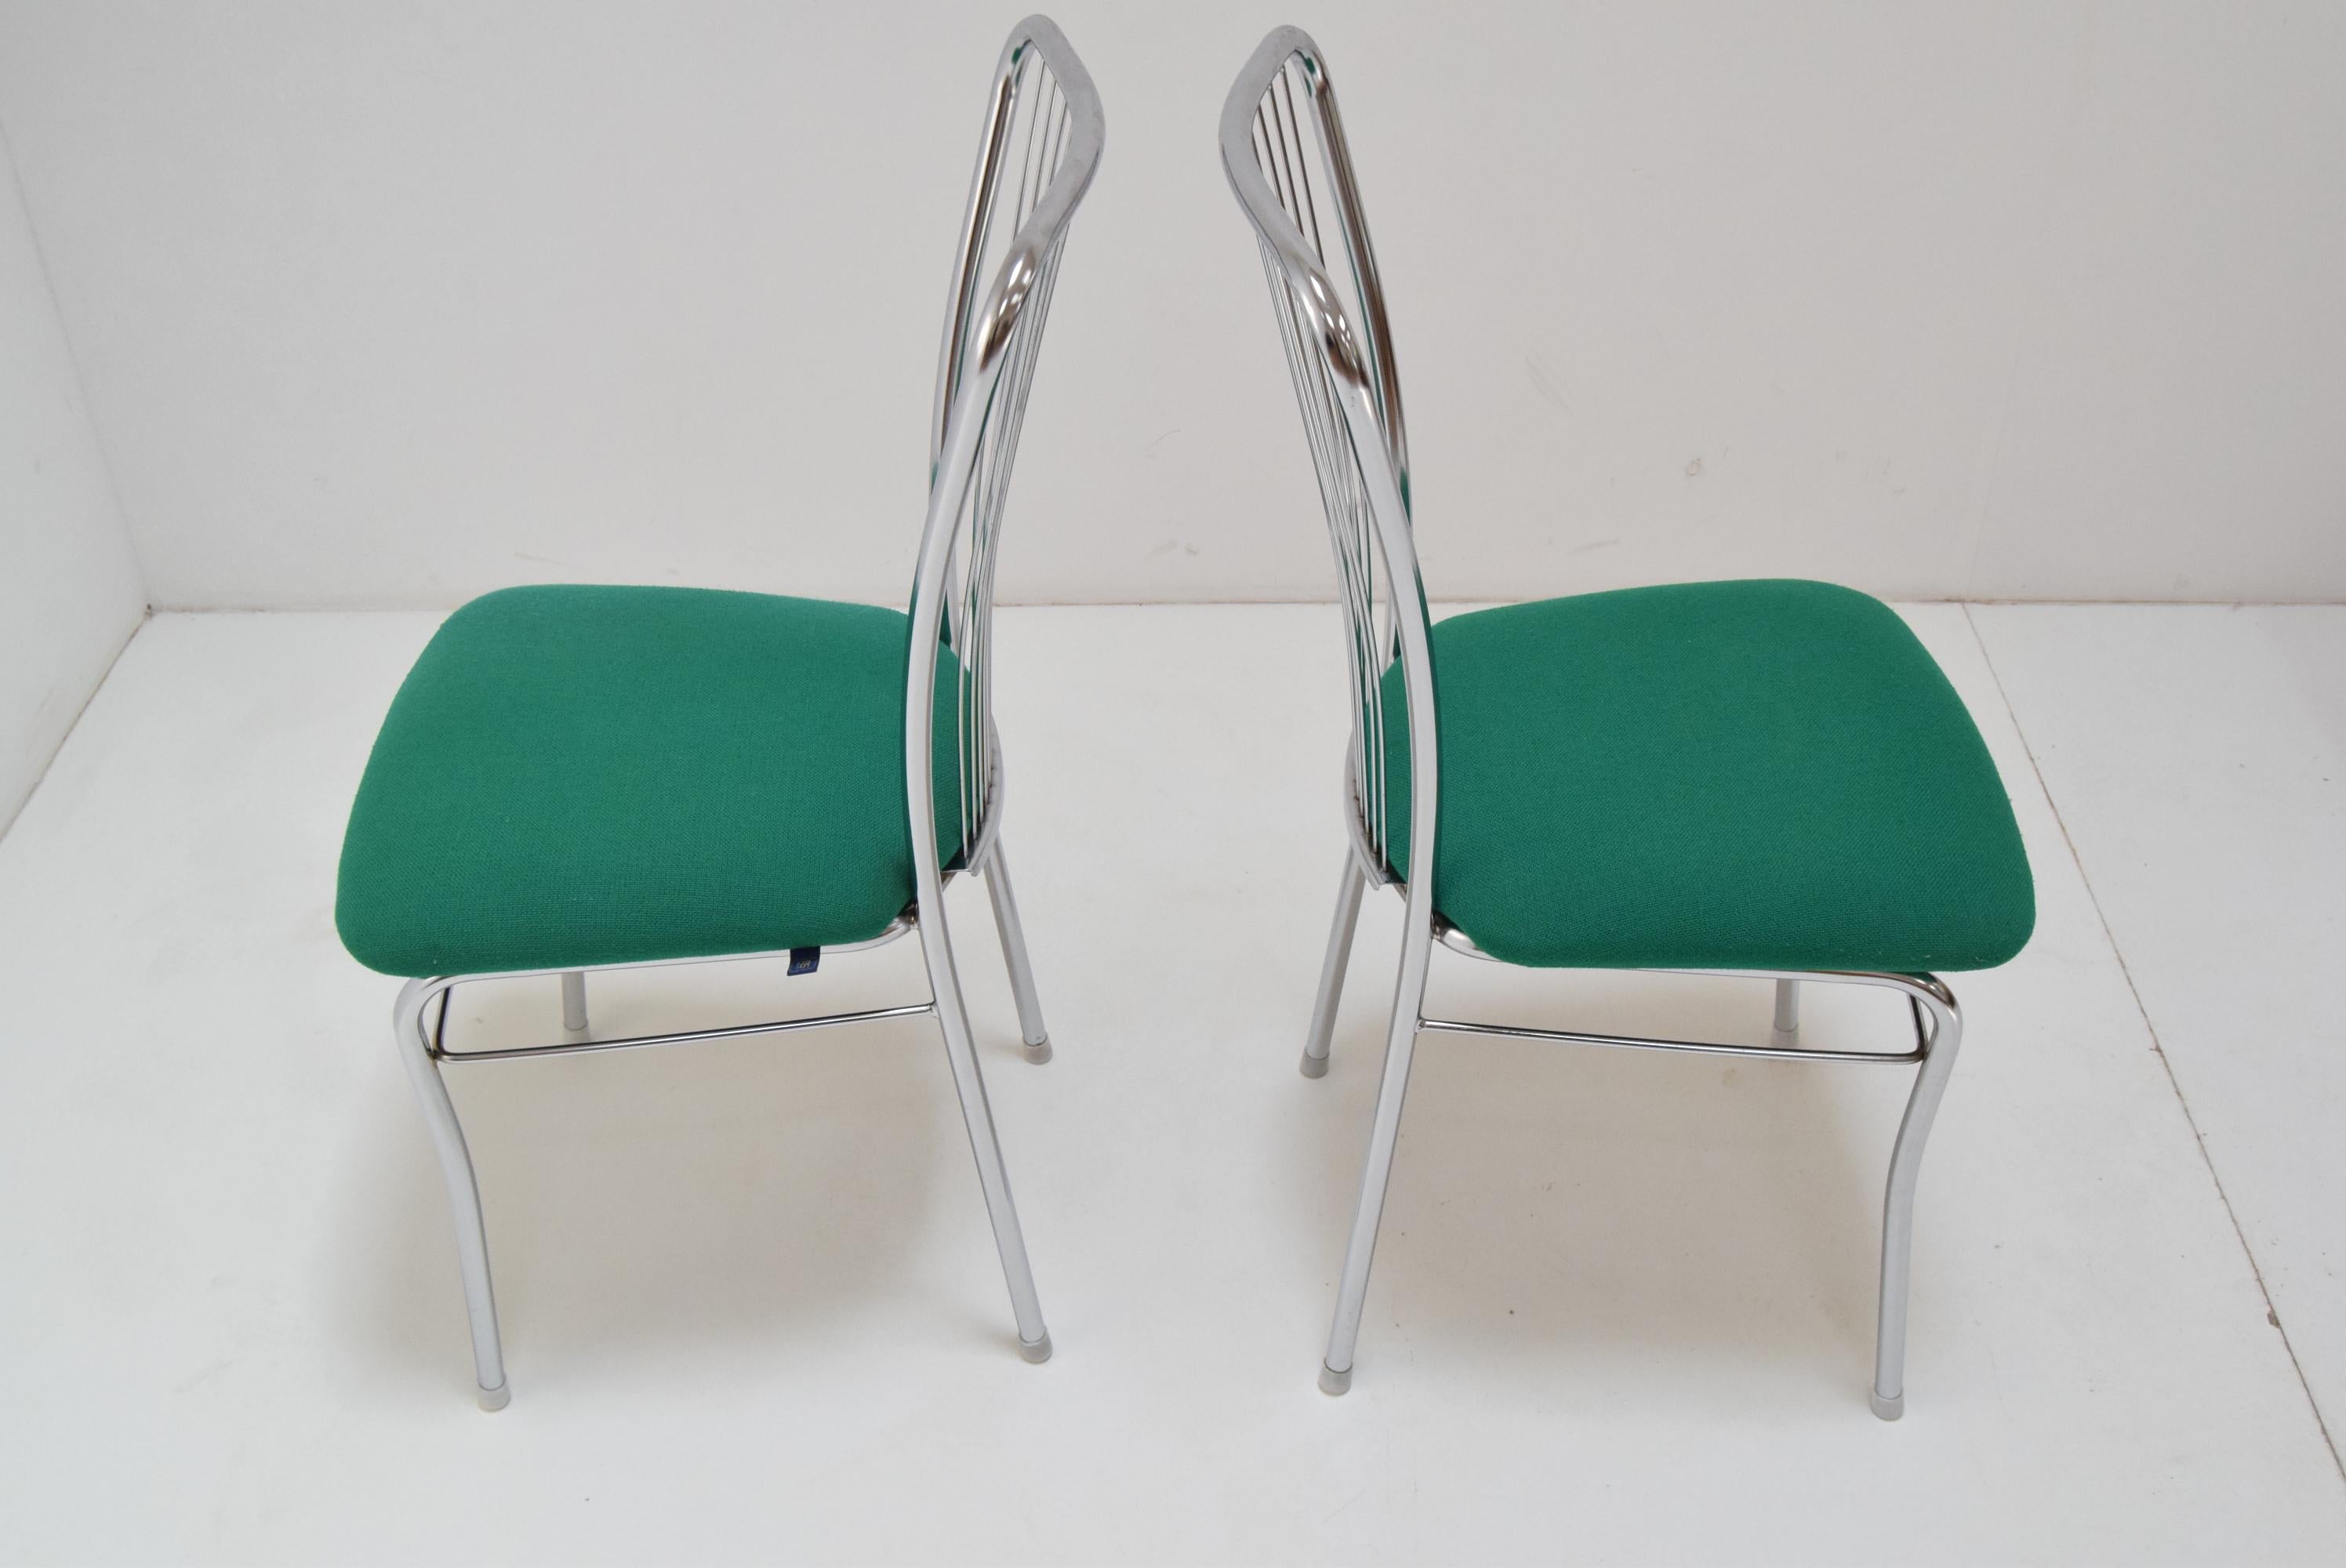 Pair of Mid-Century Chrome Chairs, Nowy Styl, circa 1980's For Sale 4